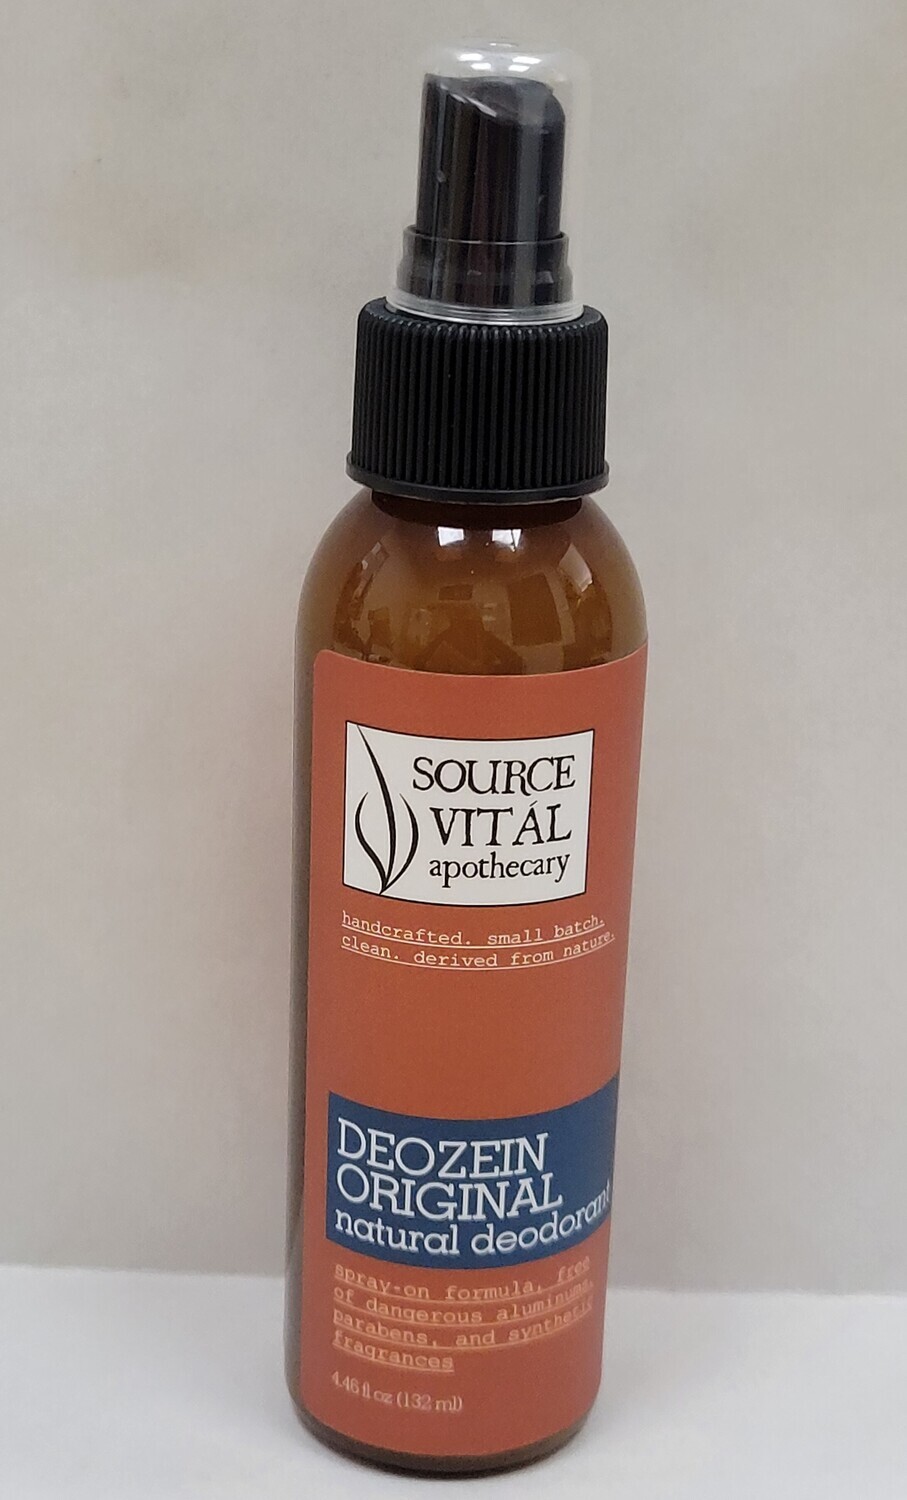 Source Vital Apothecary
Deozein Natural Deodorant 
Assorted Scents